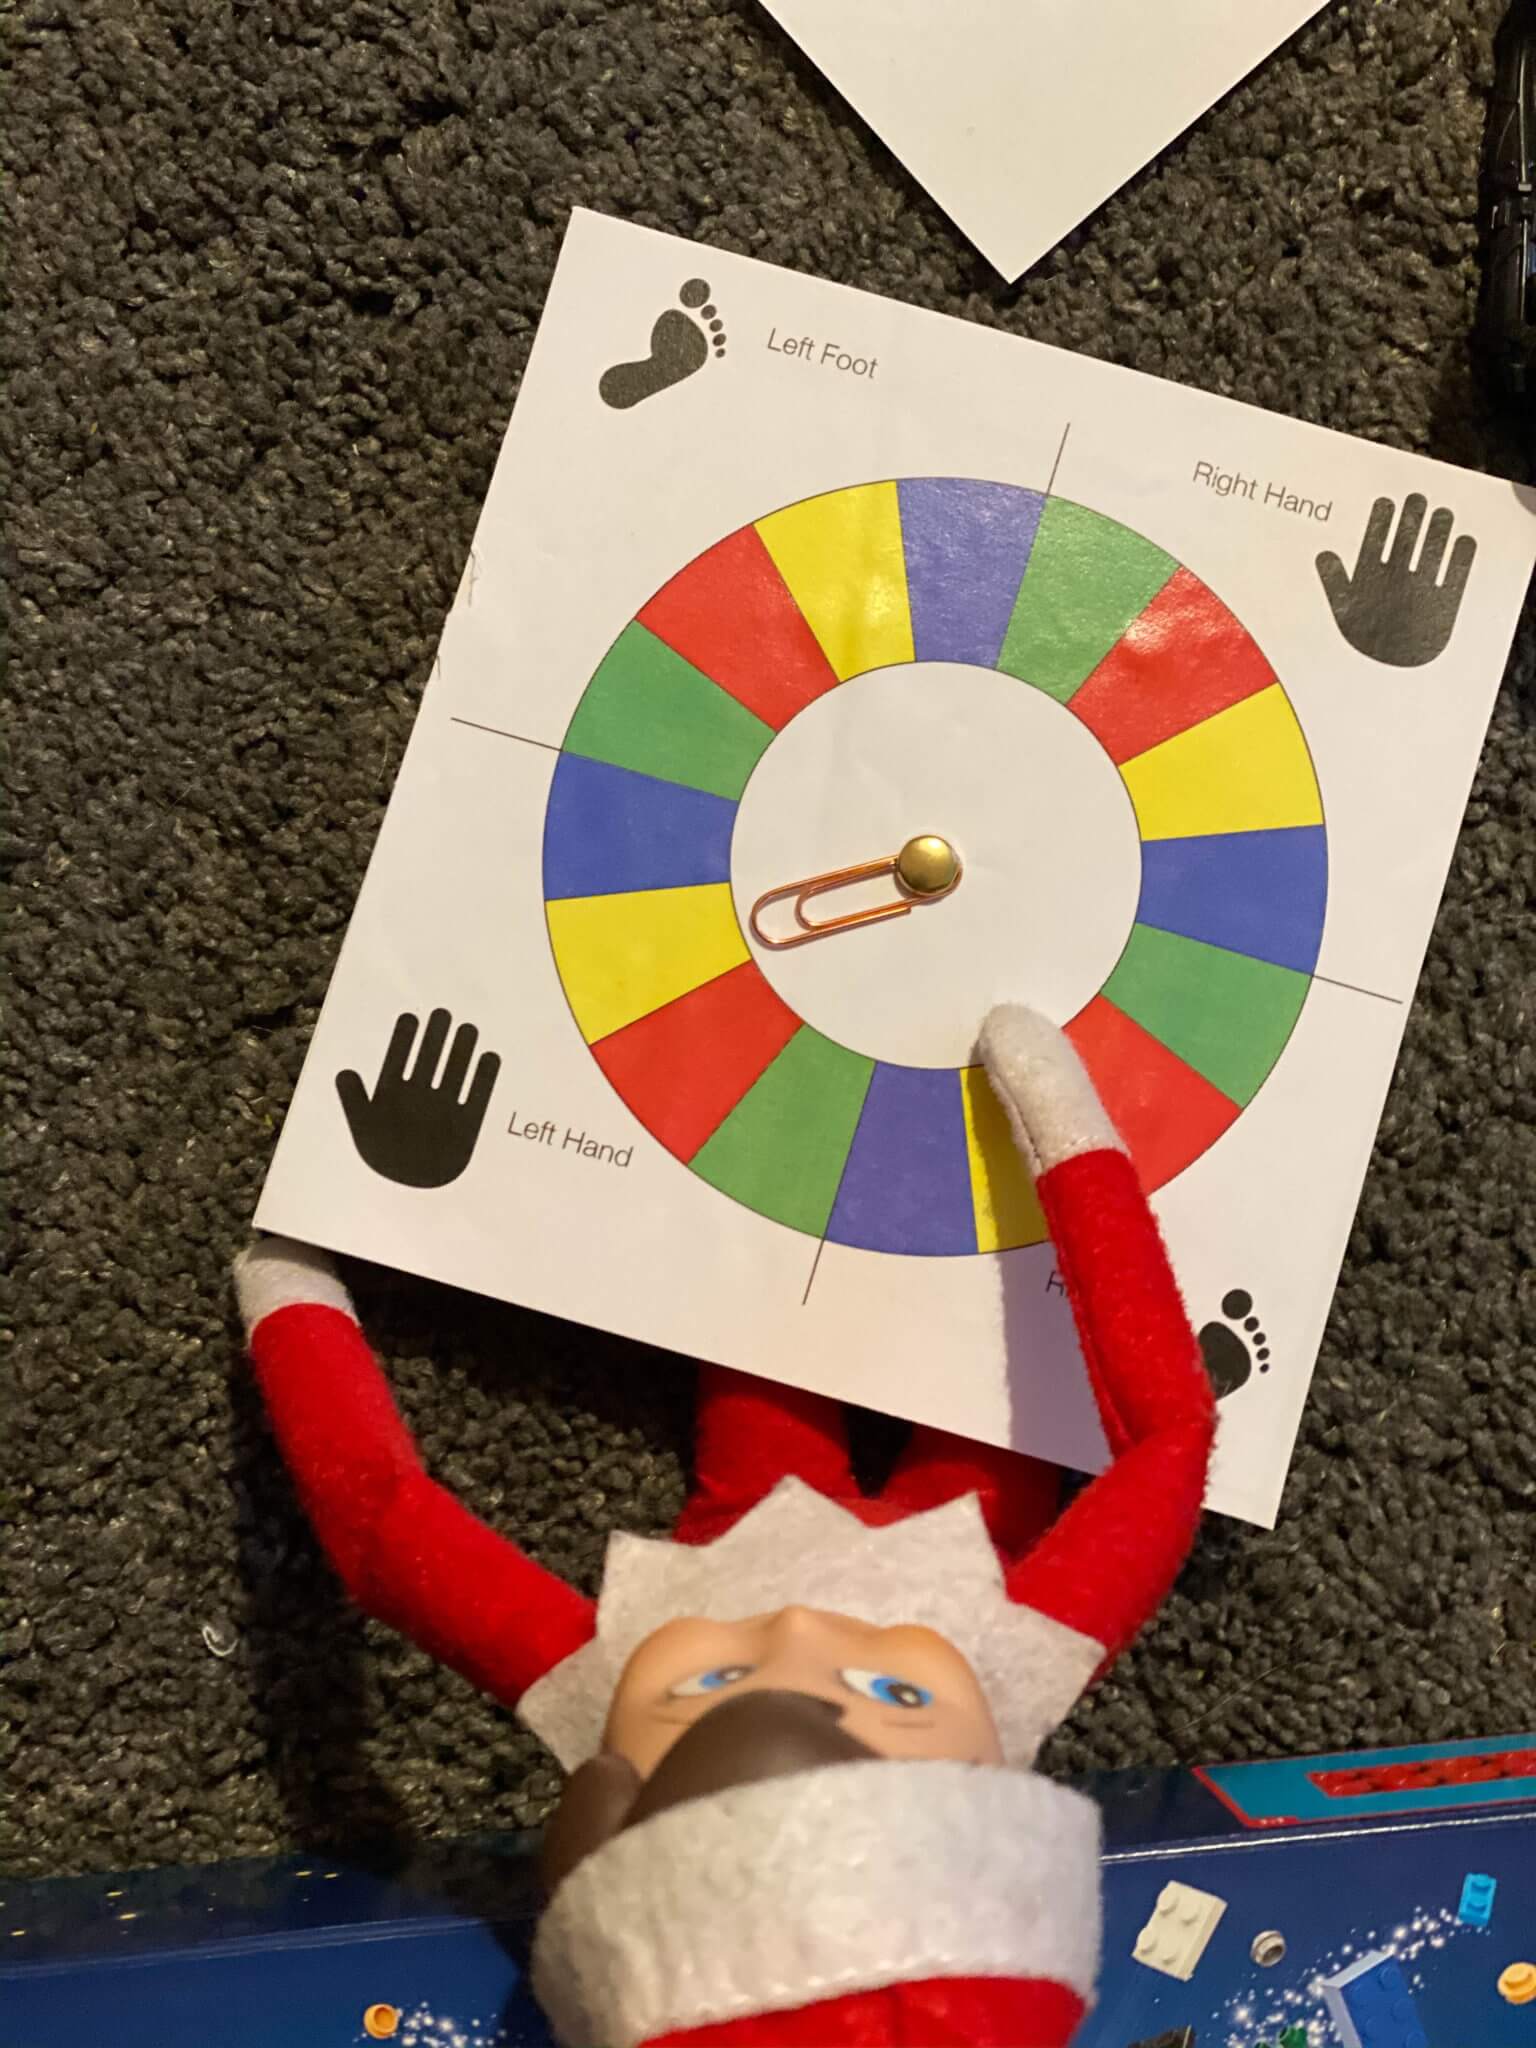 Elf on the Shelf doll playing Twister